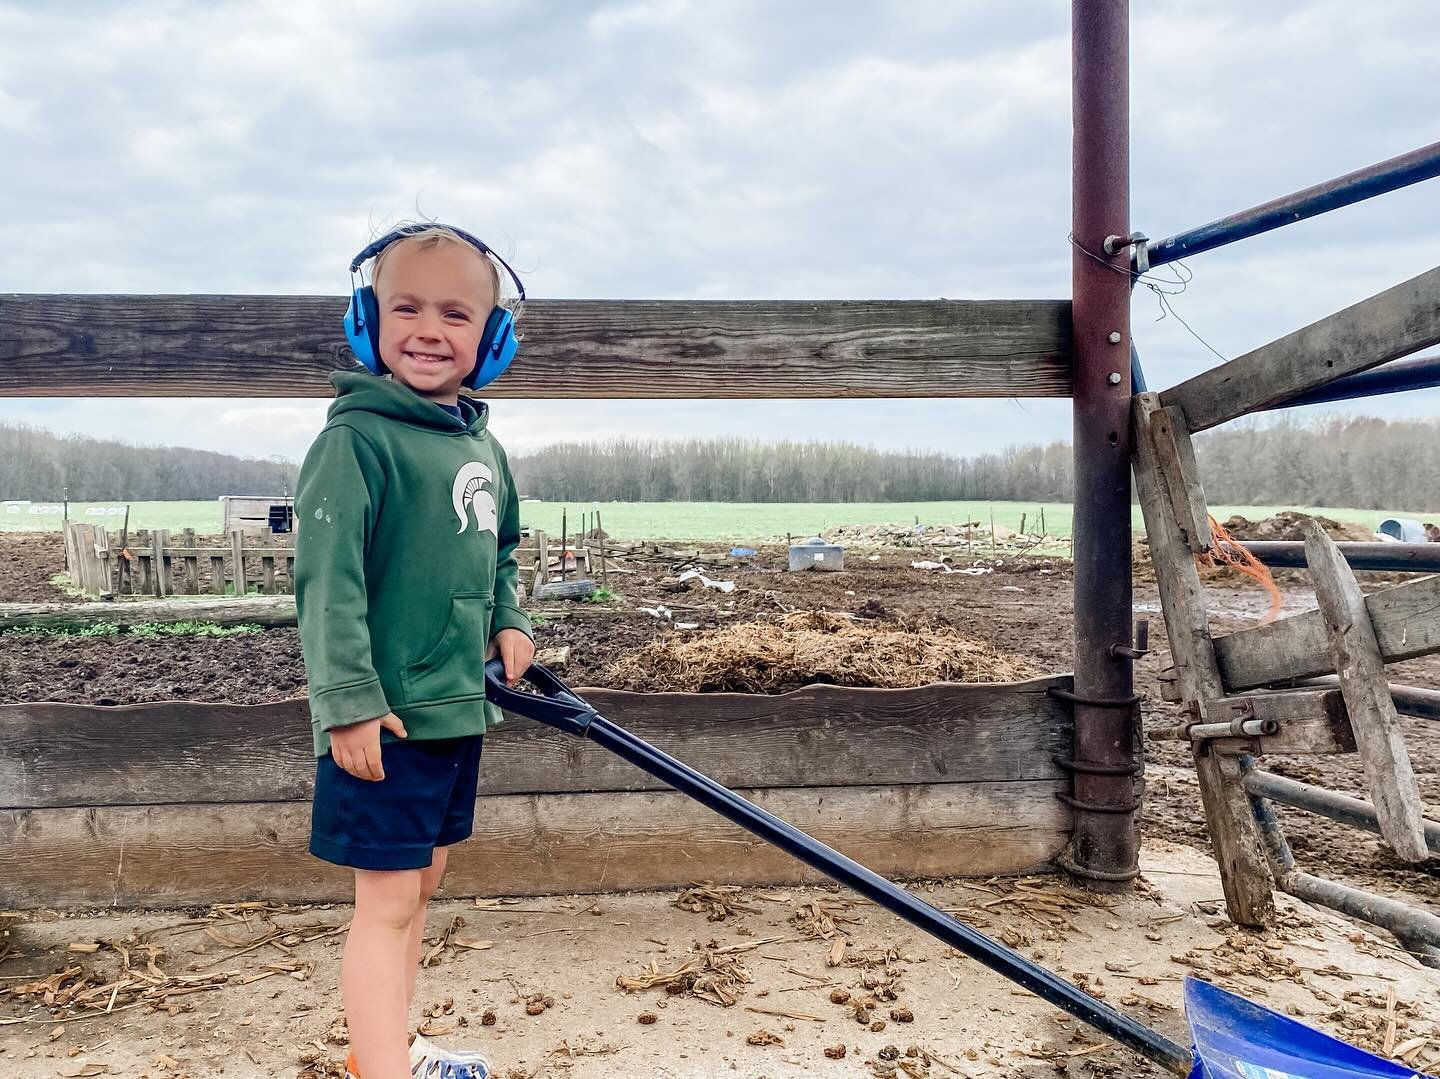 The cutest farm labor 💙💚
&hellip;
Does anyone else wish you could perpetually have a 3 year old in tow? They are the most enthusiastic workers, highly observant, always willing to learn and ask lots of awesome questions. 😅
&hellip;
We are patientl